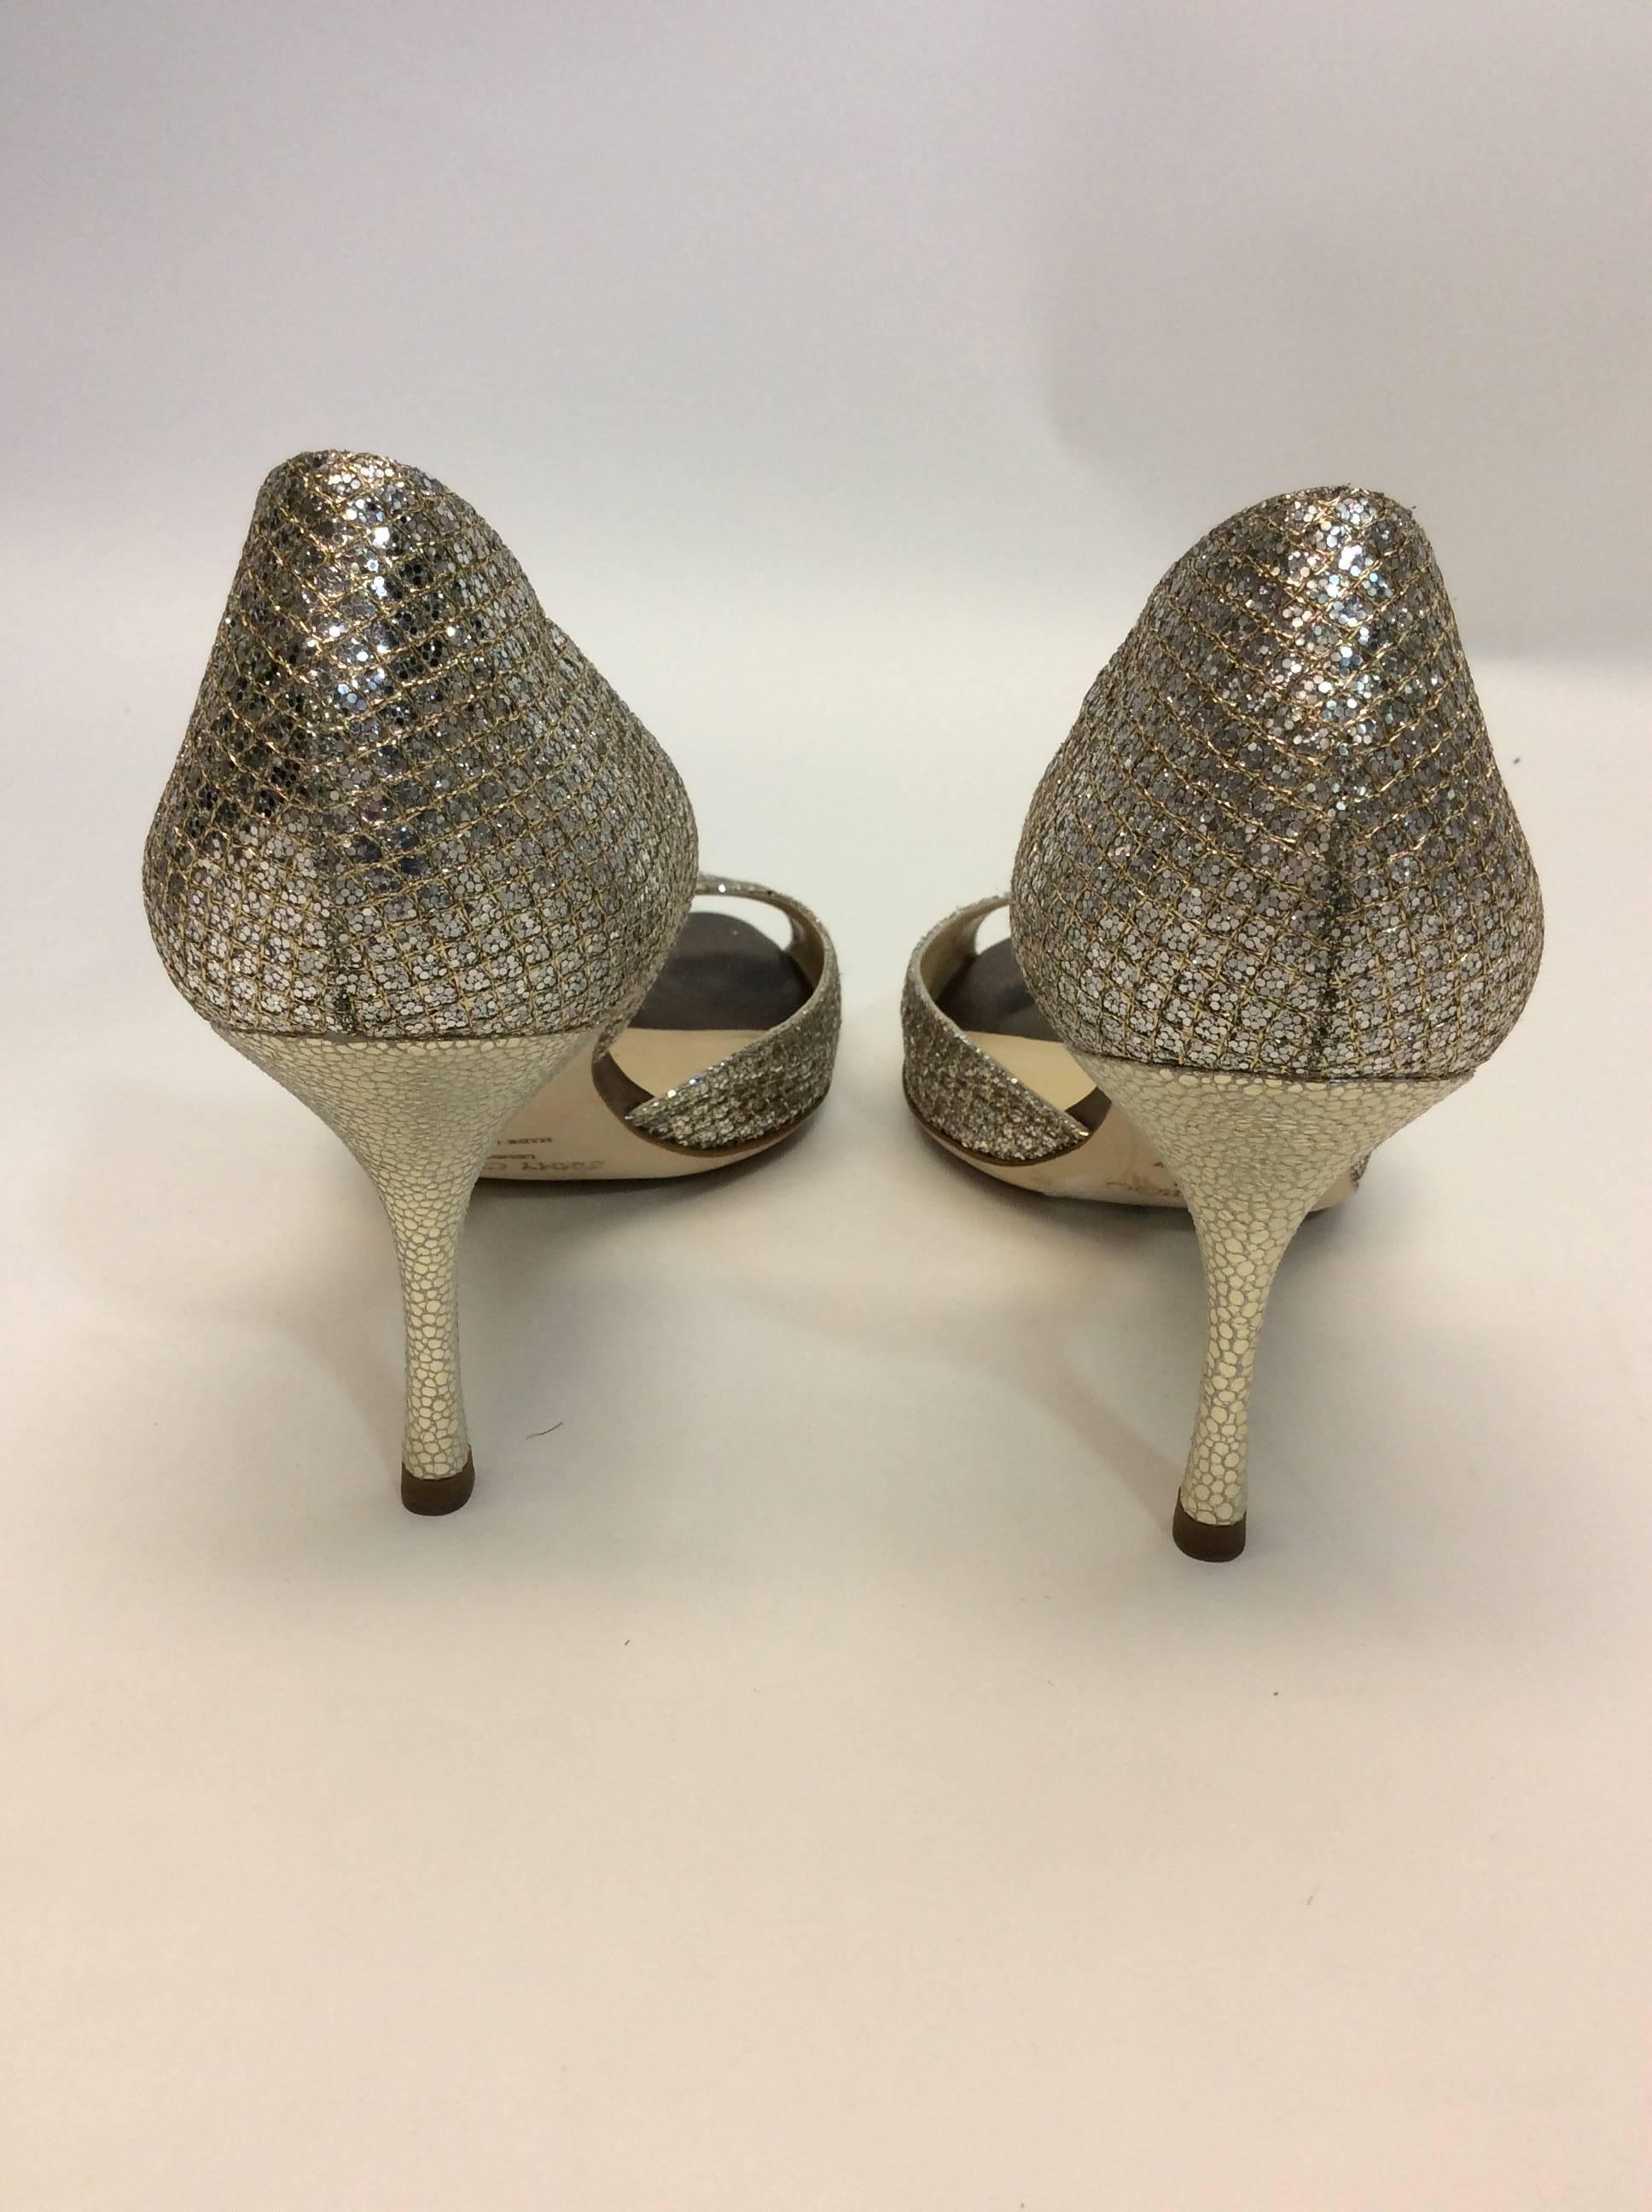 Jimmy Choo Sparkle Peep Toe Heels In Excellent Condition For Sale In Narberth, PA